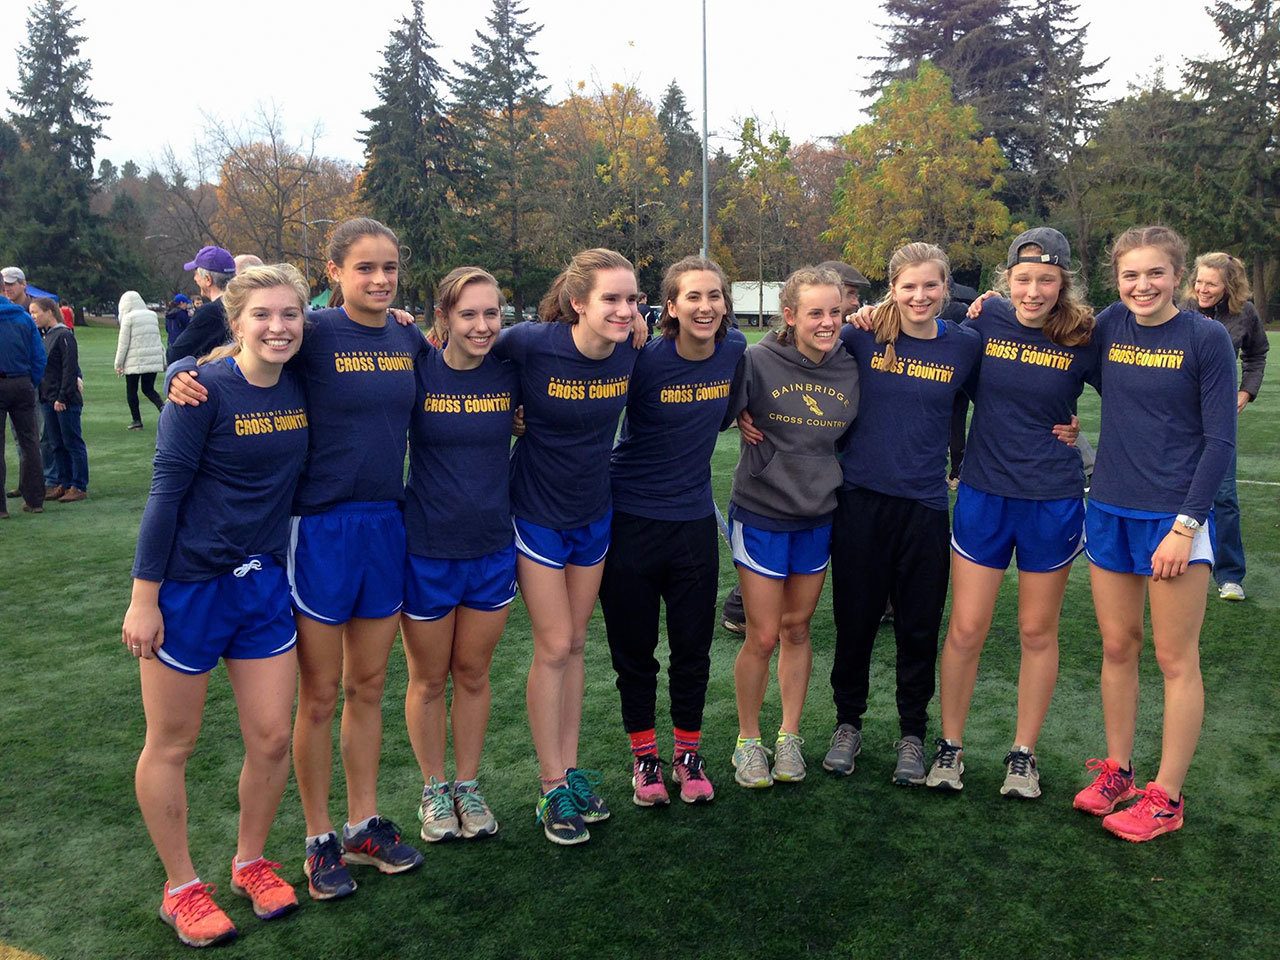 Photo courtesy of Paul Benton                                 The Bainbridge High School girls varsity cross country team scored a fifth-place finish at the recent SeaKing District 2-3A Championship meet at Lower Woodland Park in Seattle, earning themselves a trip to the state championship in Pasco on Saturday, Nov. 5.